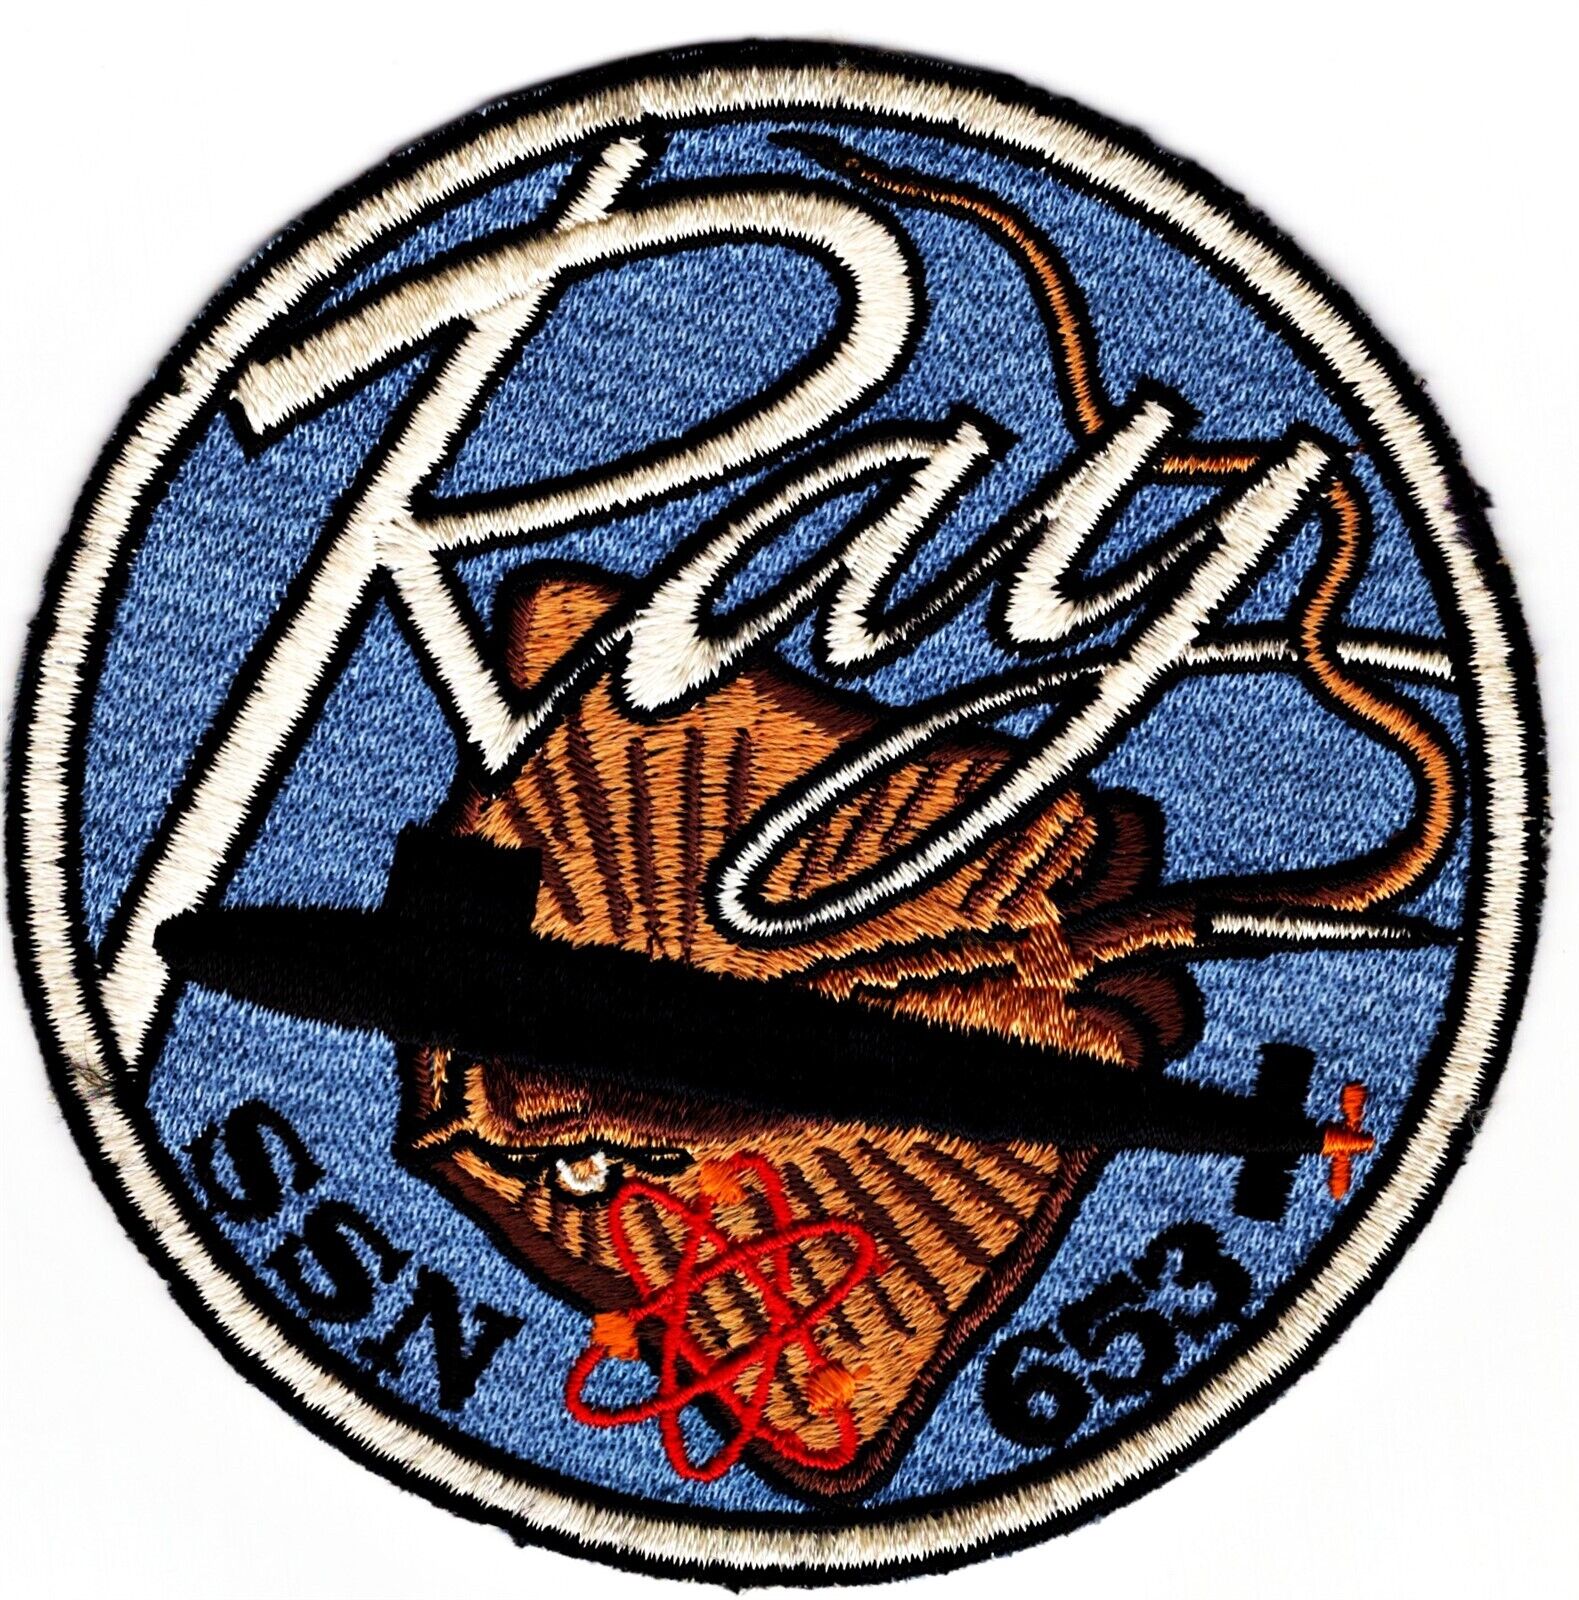 USS Ray SSN-653 US Navy submarine period original large 5 inch size